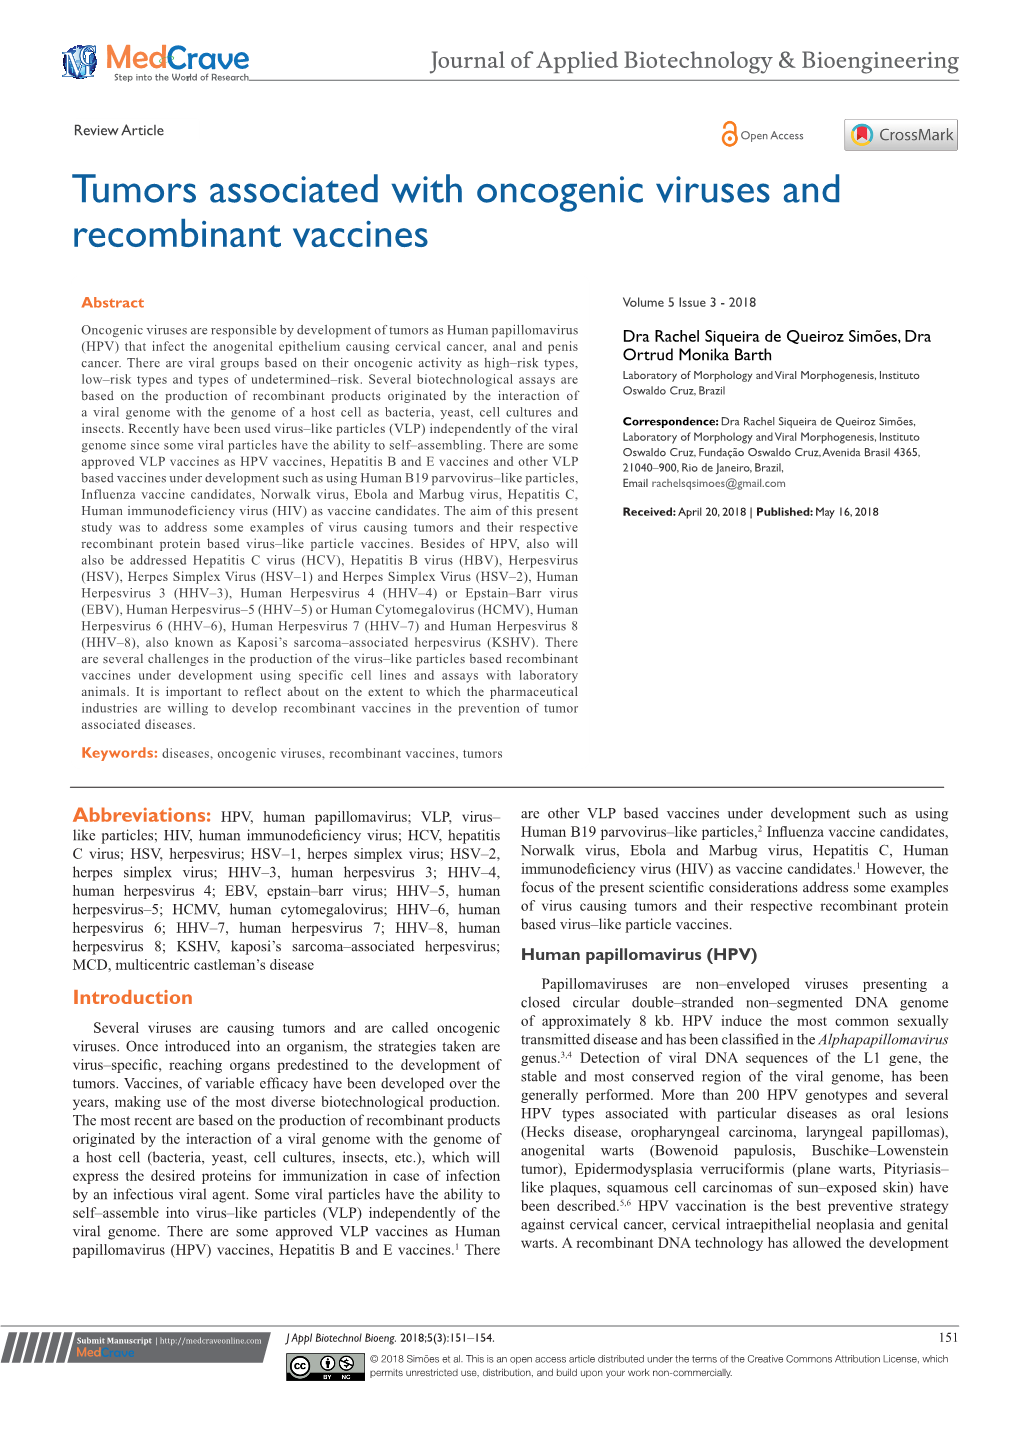 Tumors Associated with Oncogenic Viruses and Recombinant Vaccines